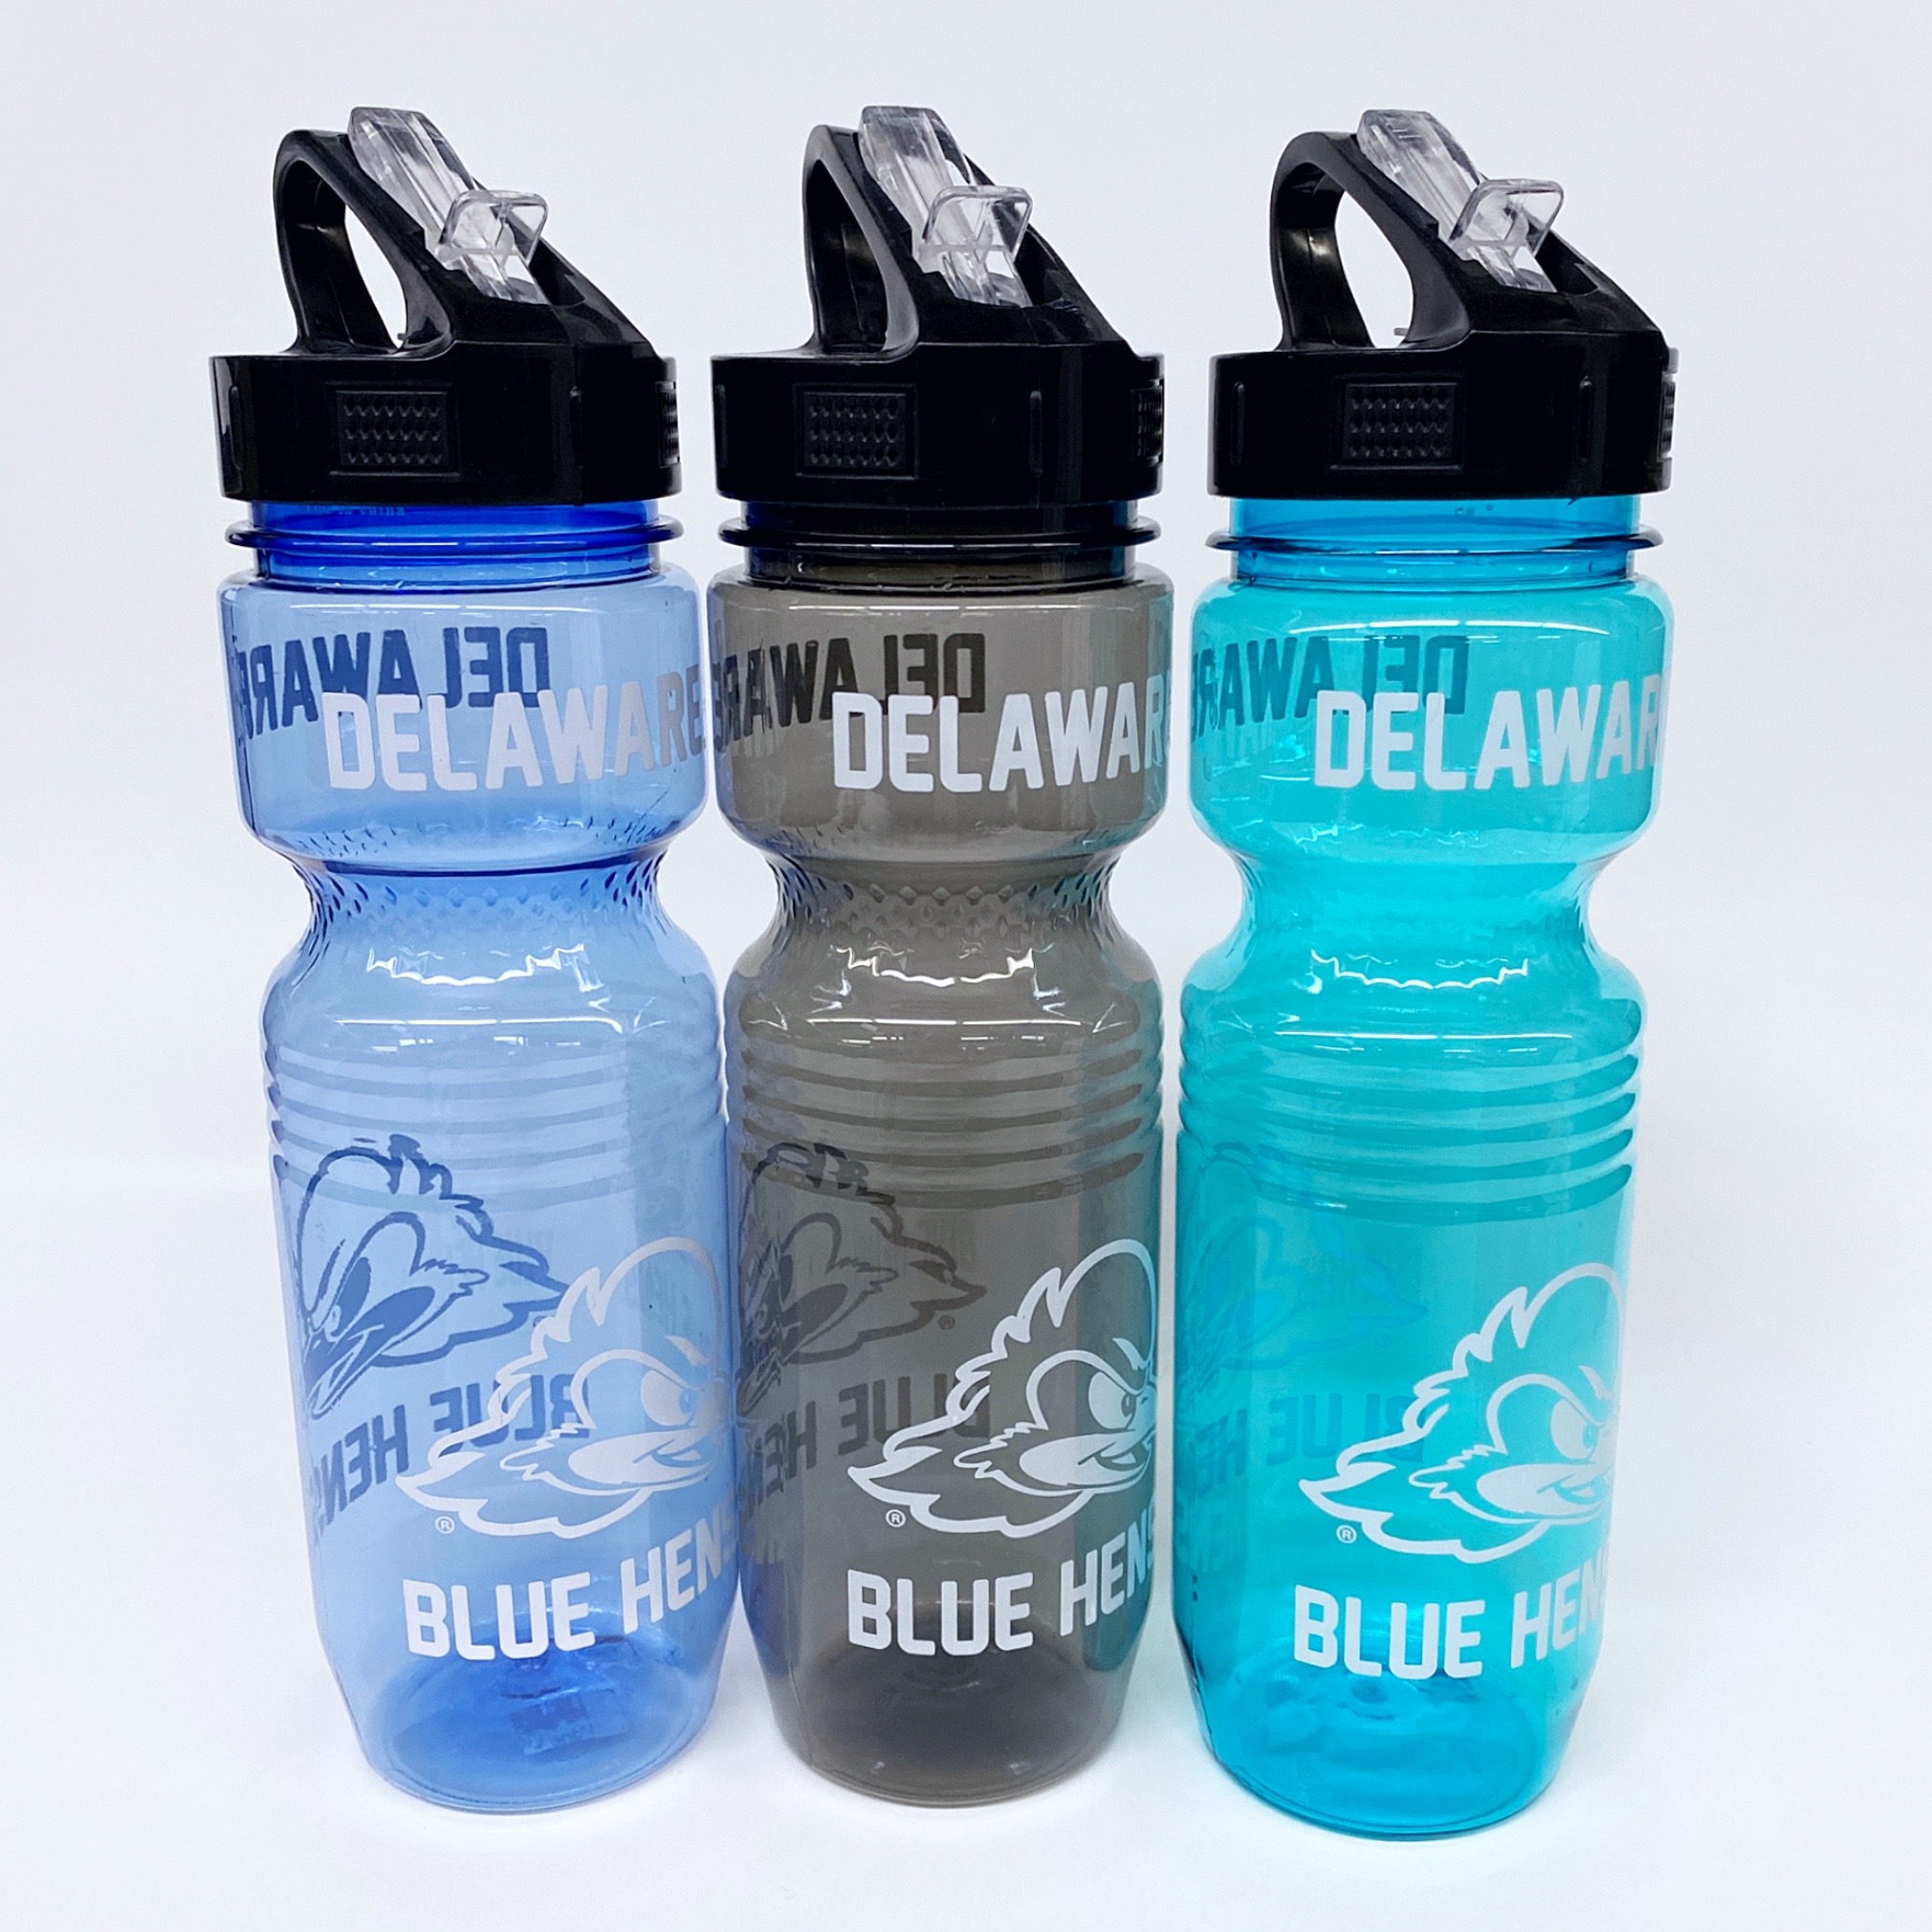 University of Delaware “Class Of” Water Bottle – National 5 and 10